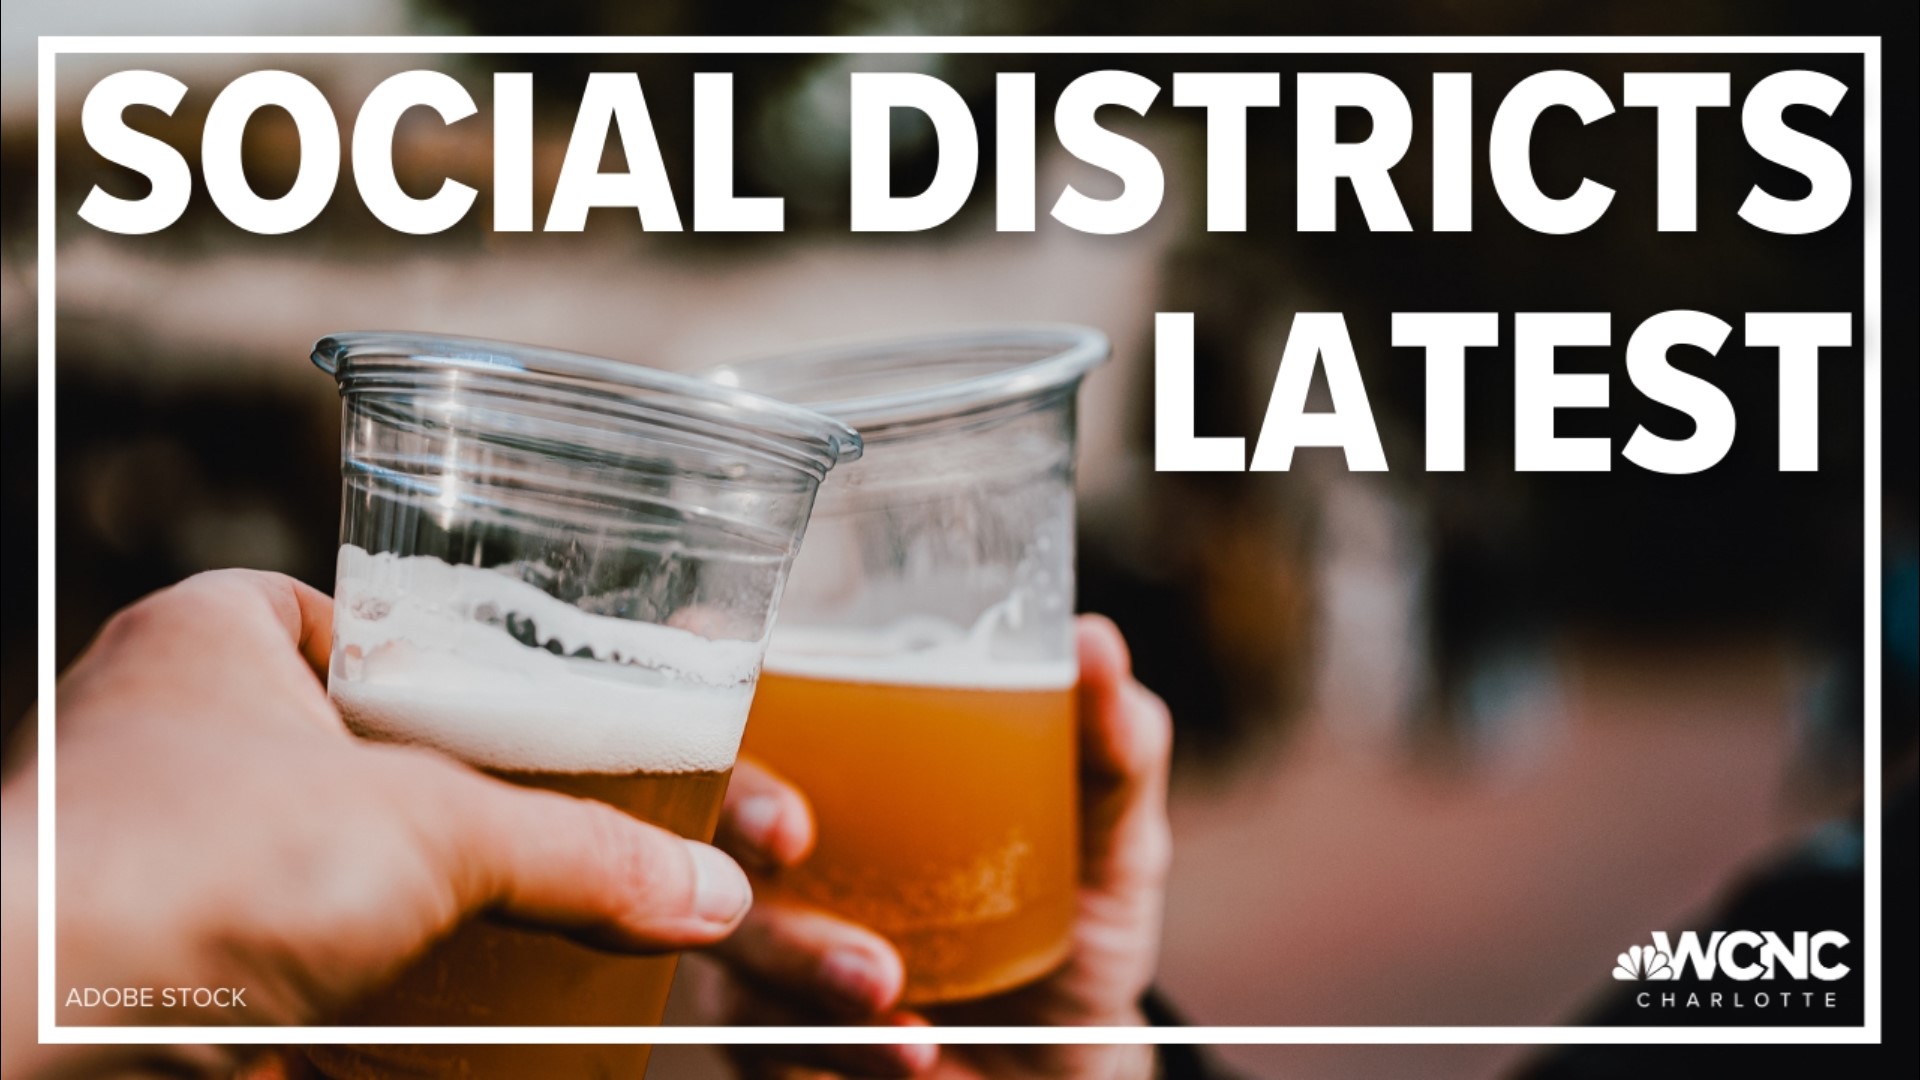 Social districts allow people to carry alcohol on specially-permitted streets or public parks.